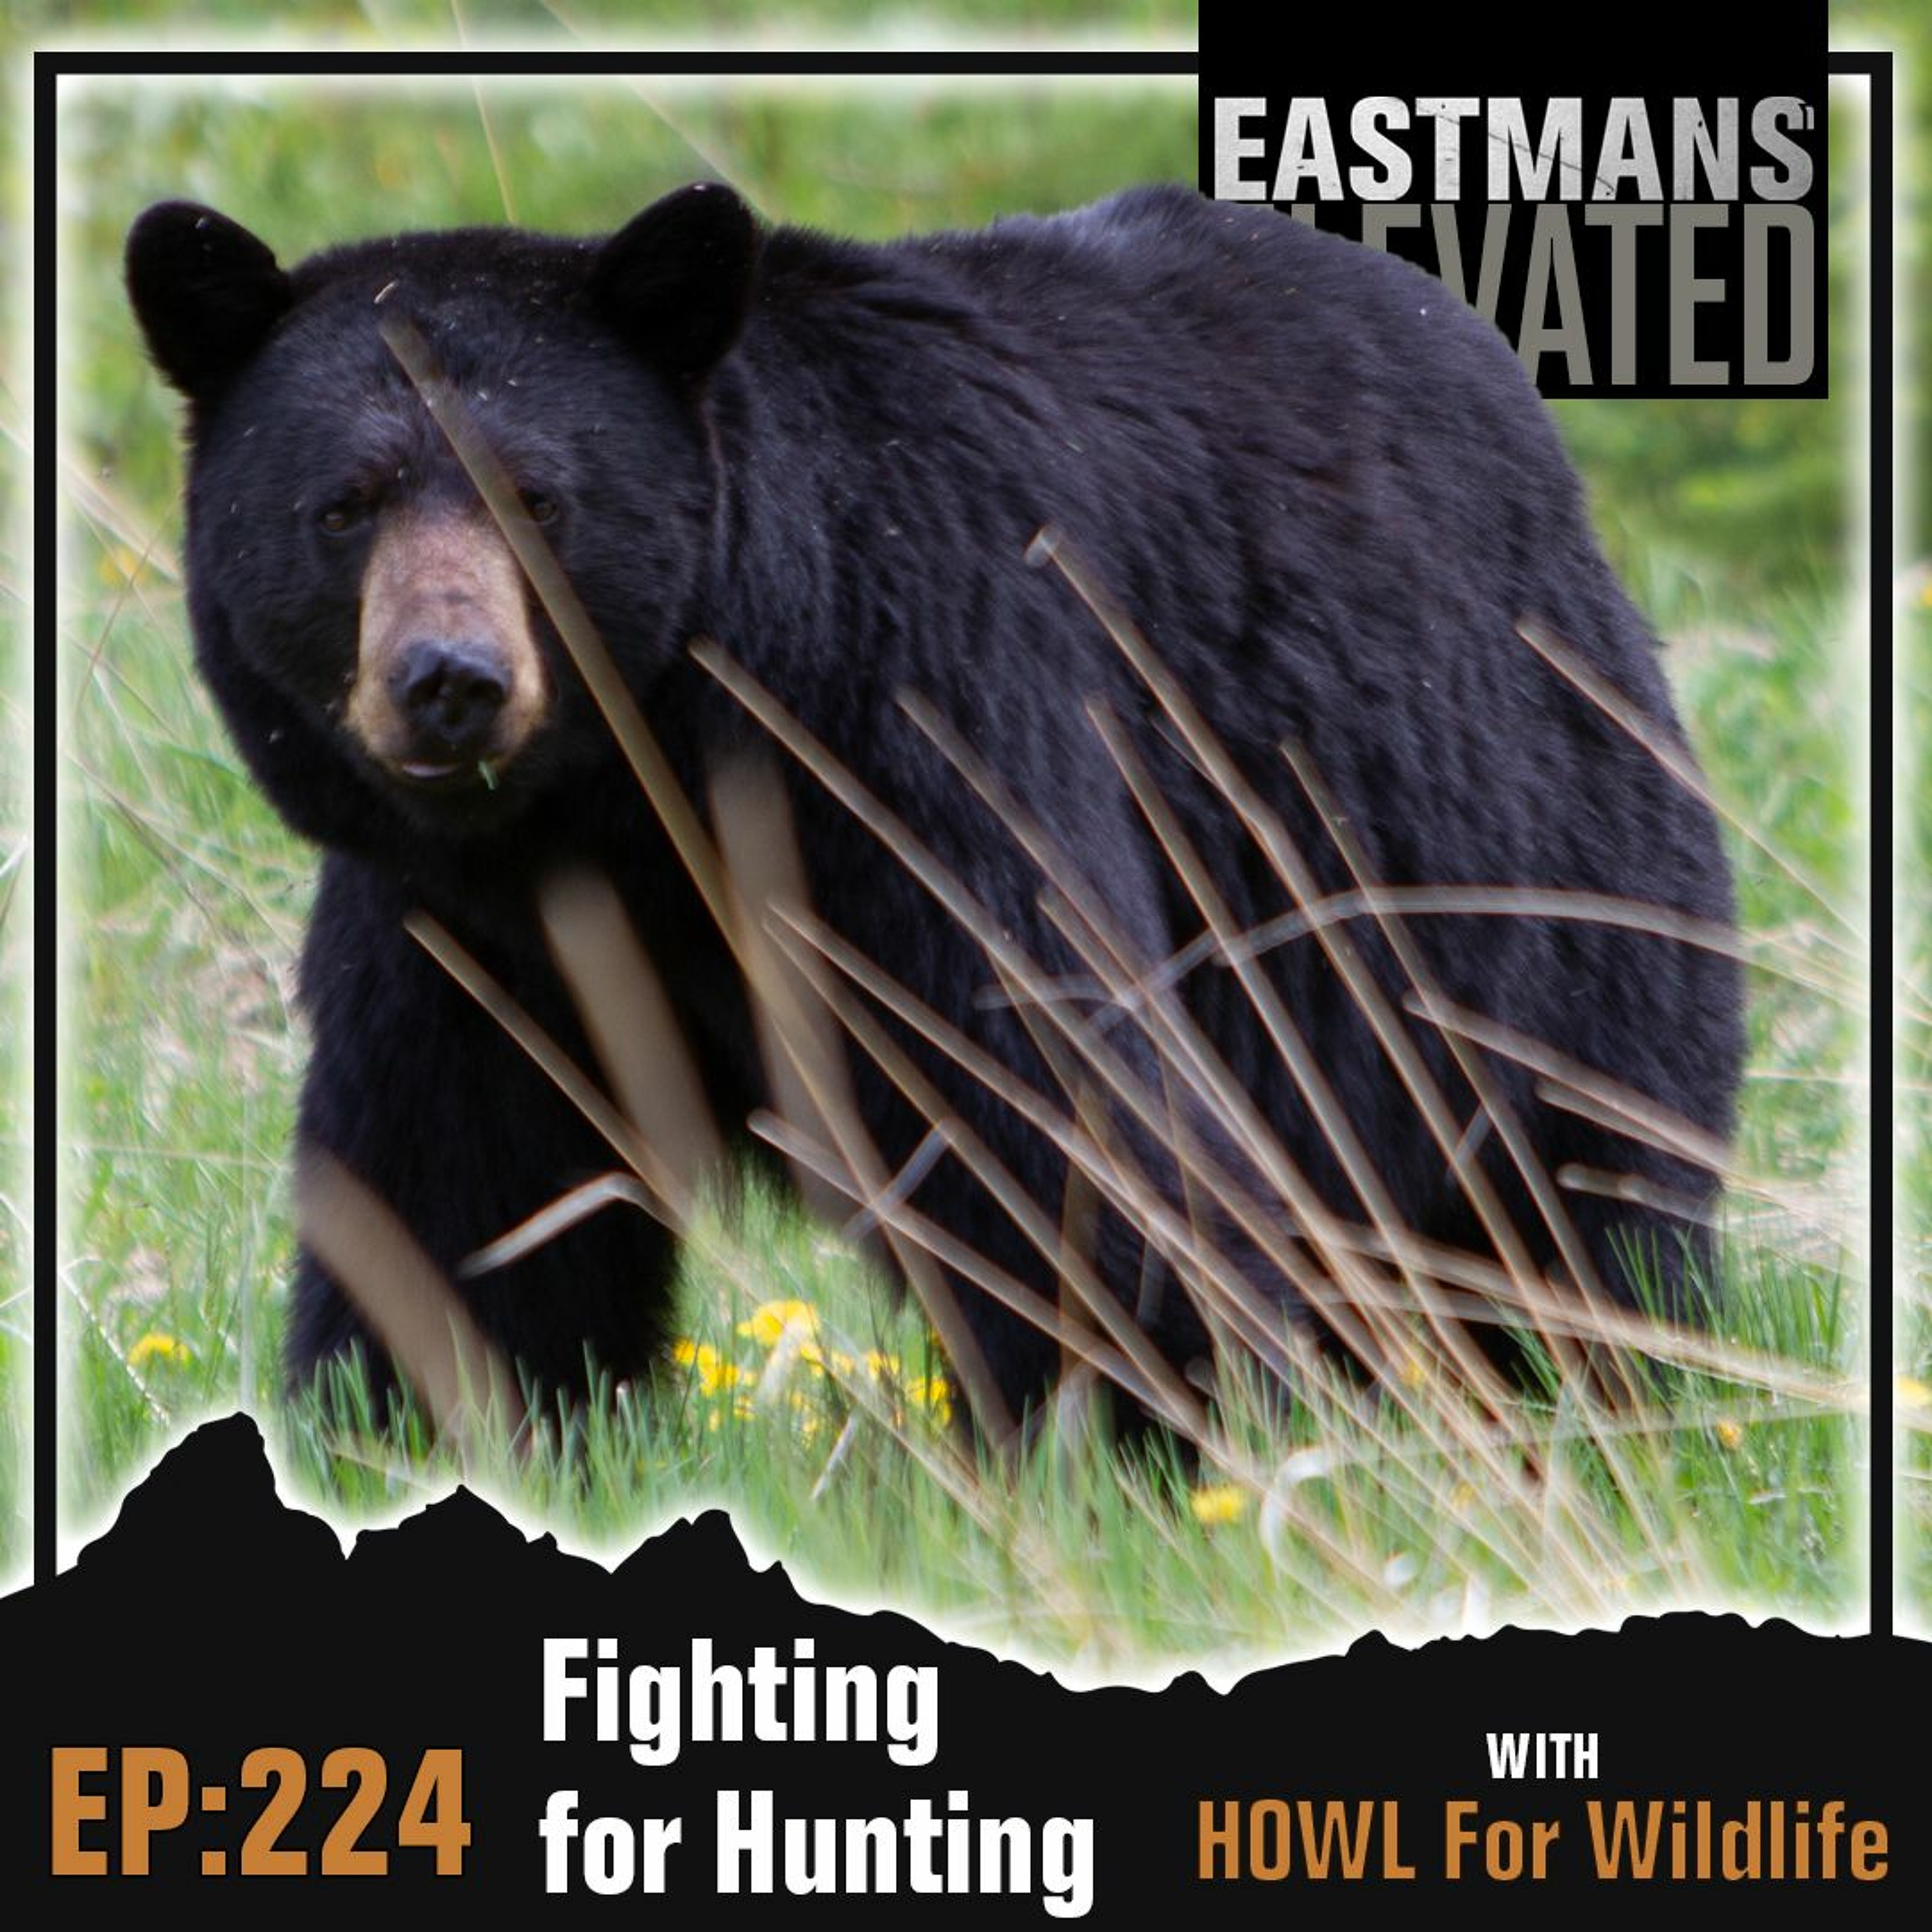 Episode 324: Fighting for Hunting with HOWL